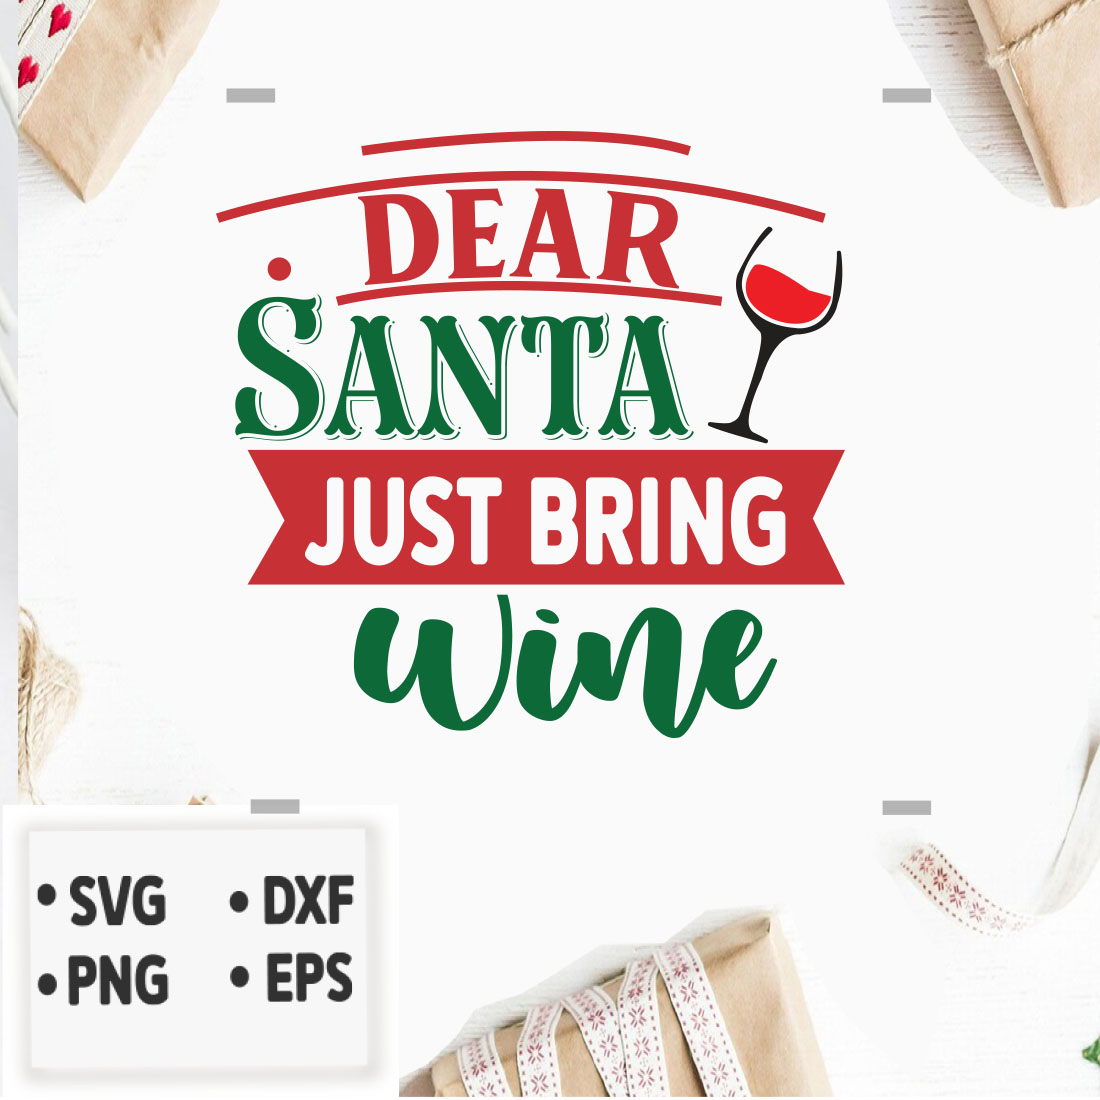 Image with gorgeous print Dear Santa Just Bring Wine.